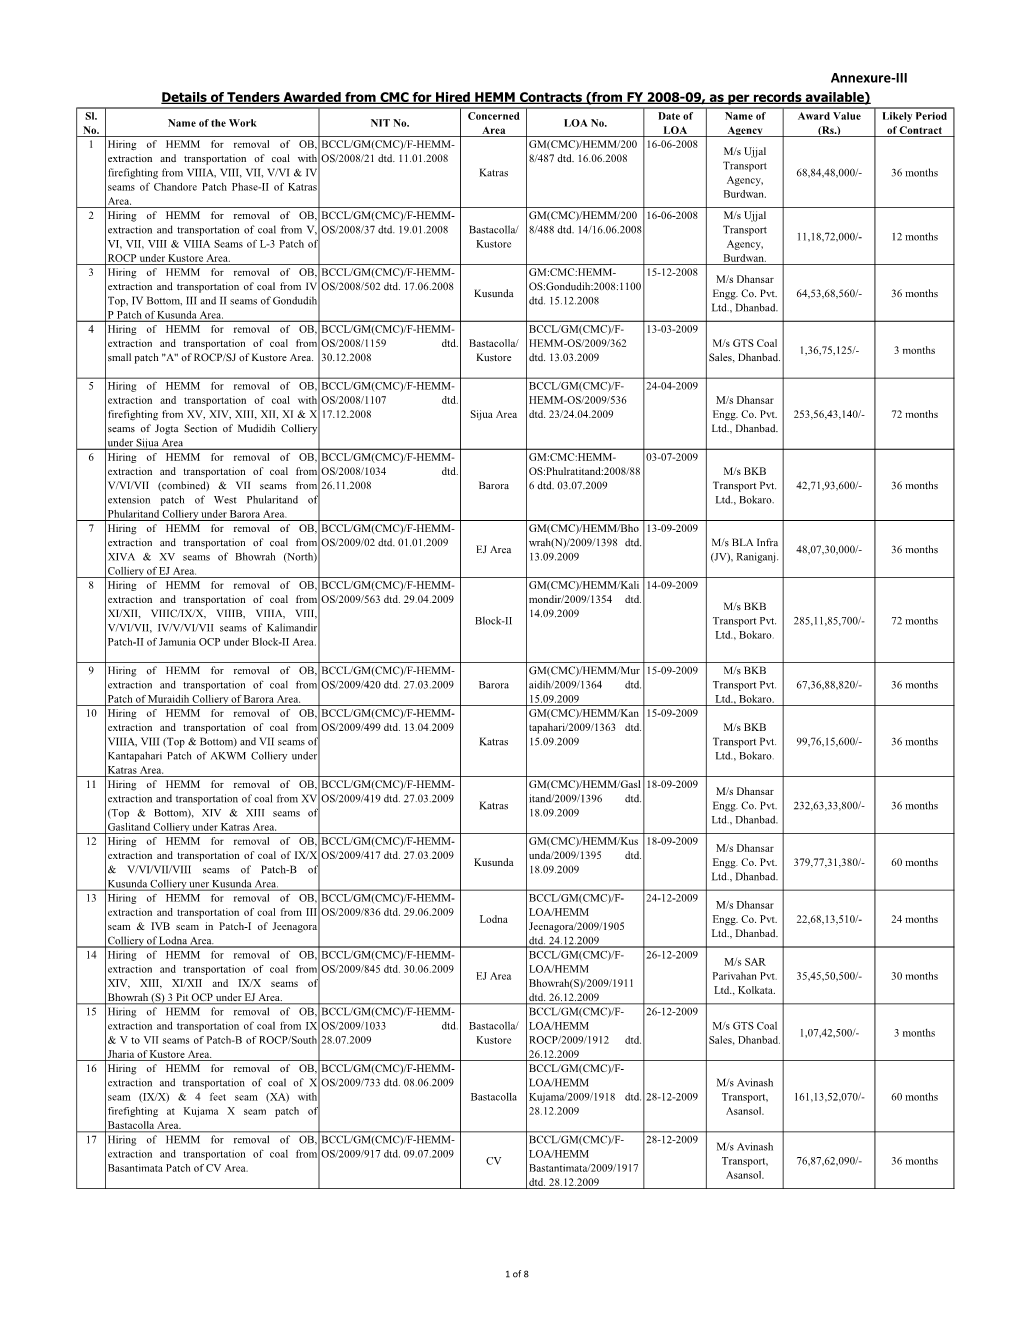 Annexure-III Details of Tenders Awarded from CMC for Hired HEMM Contracts (From FY 2008-09, As Per Records Available) Sl